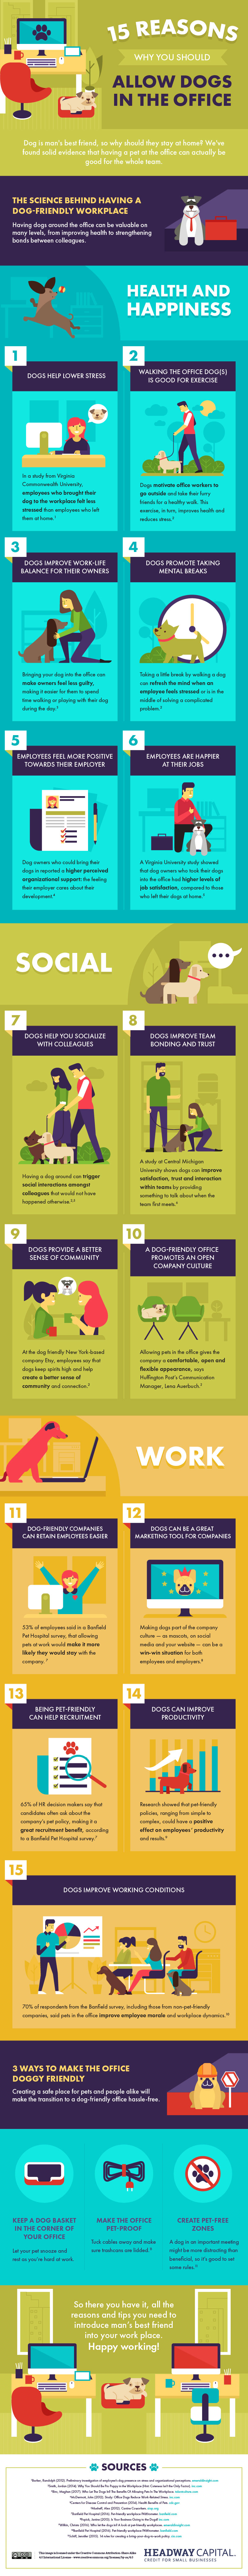 15 Reasons Why Dogs Should Be Allowed in the Office